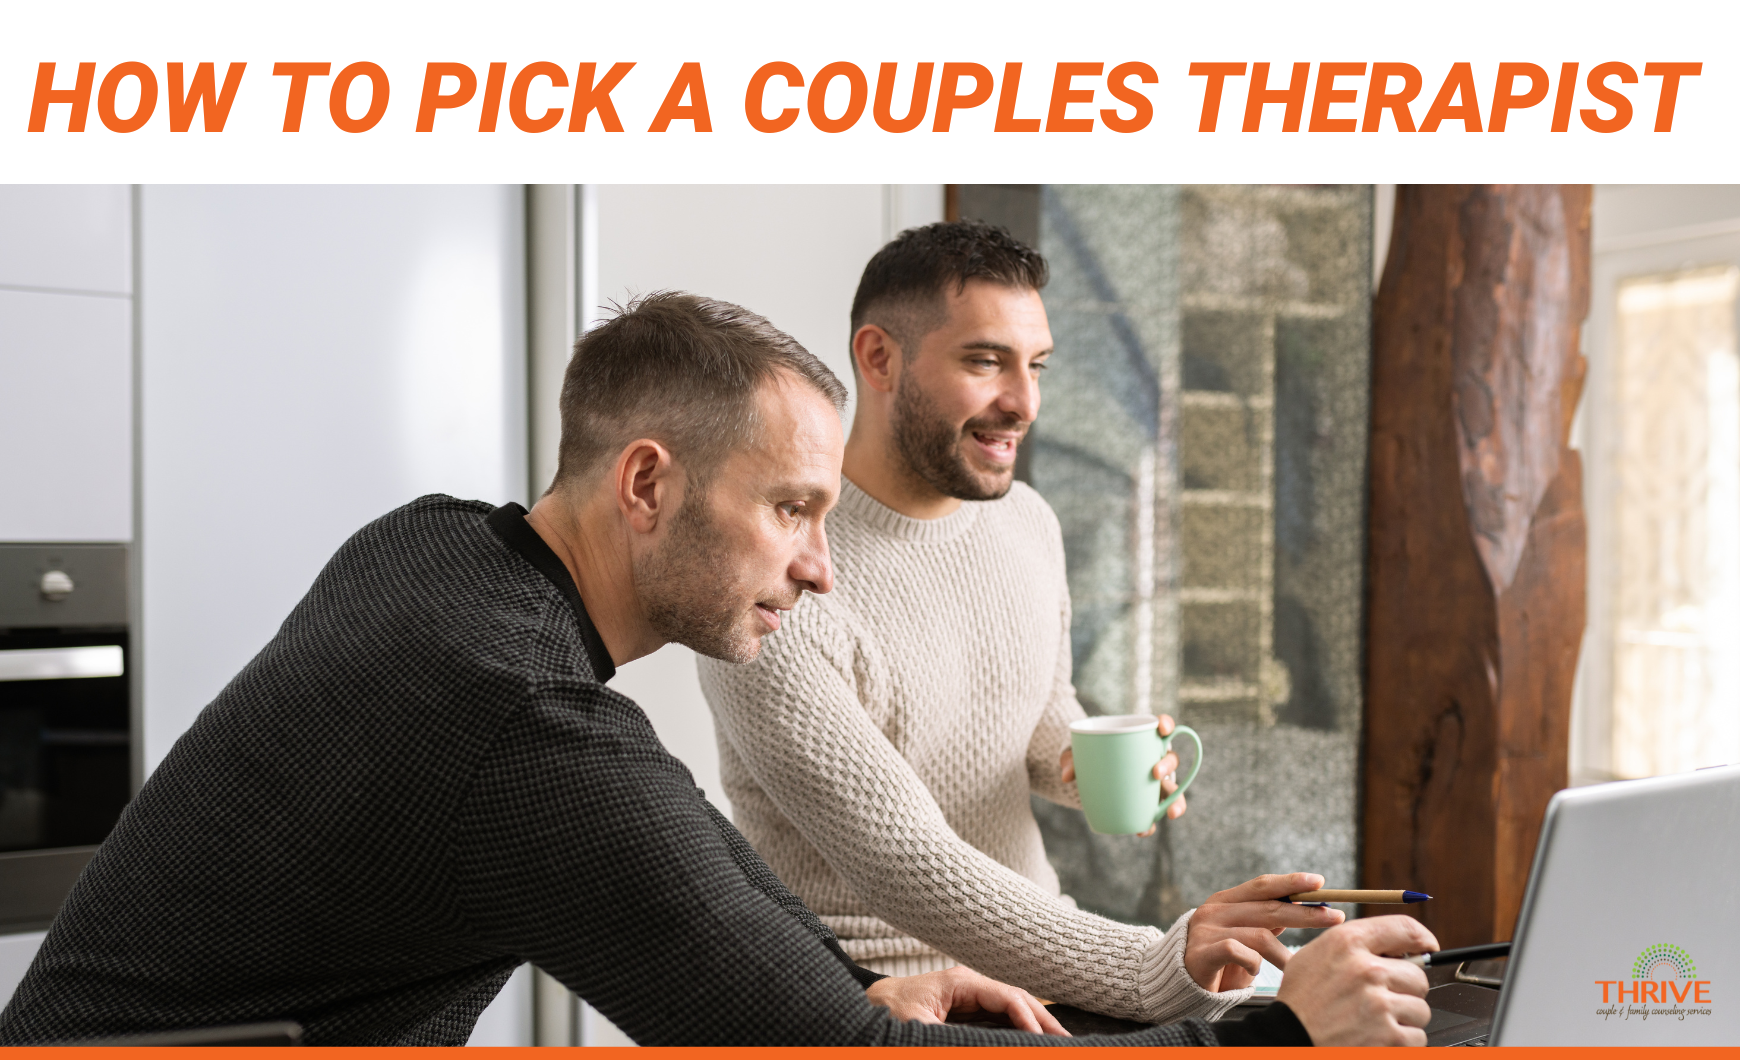 Dark orange text on a white background that reads "How to Pick a Couples Therapist" over a stock photo of a gay male couple standing at a counter with coffee mugs in their hands, pointing and looking at a laptop.